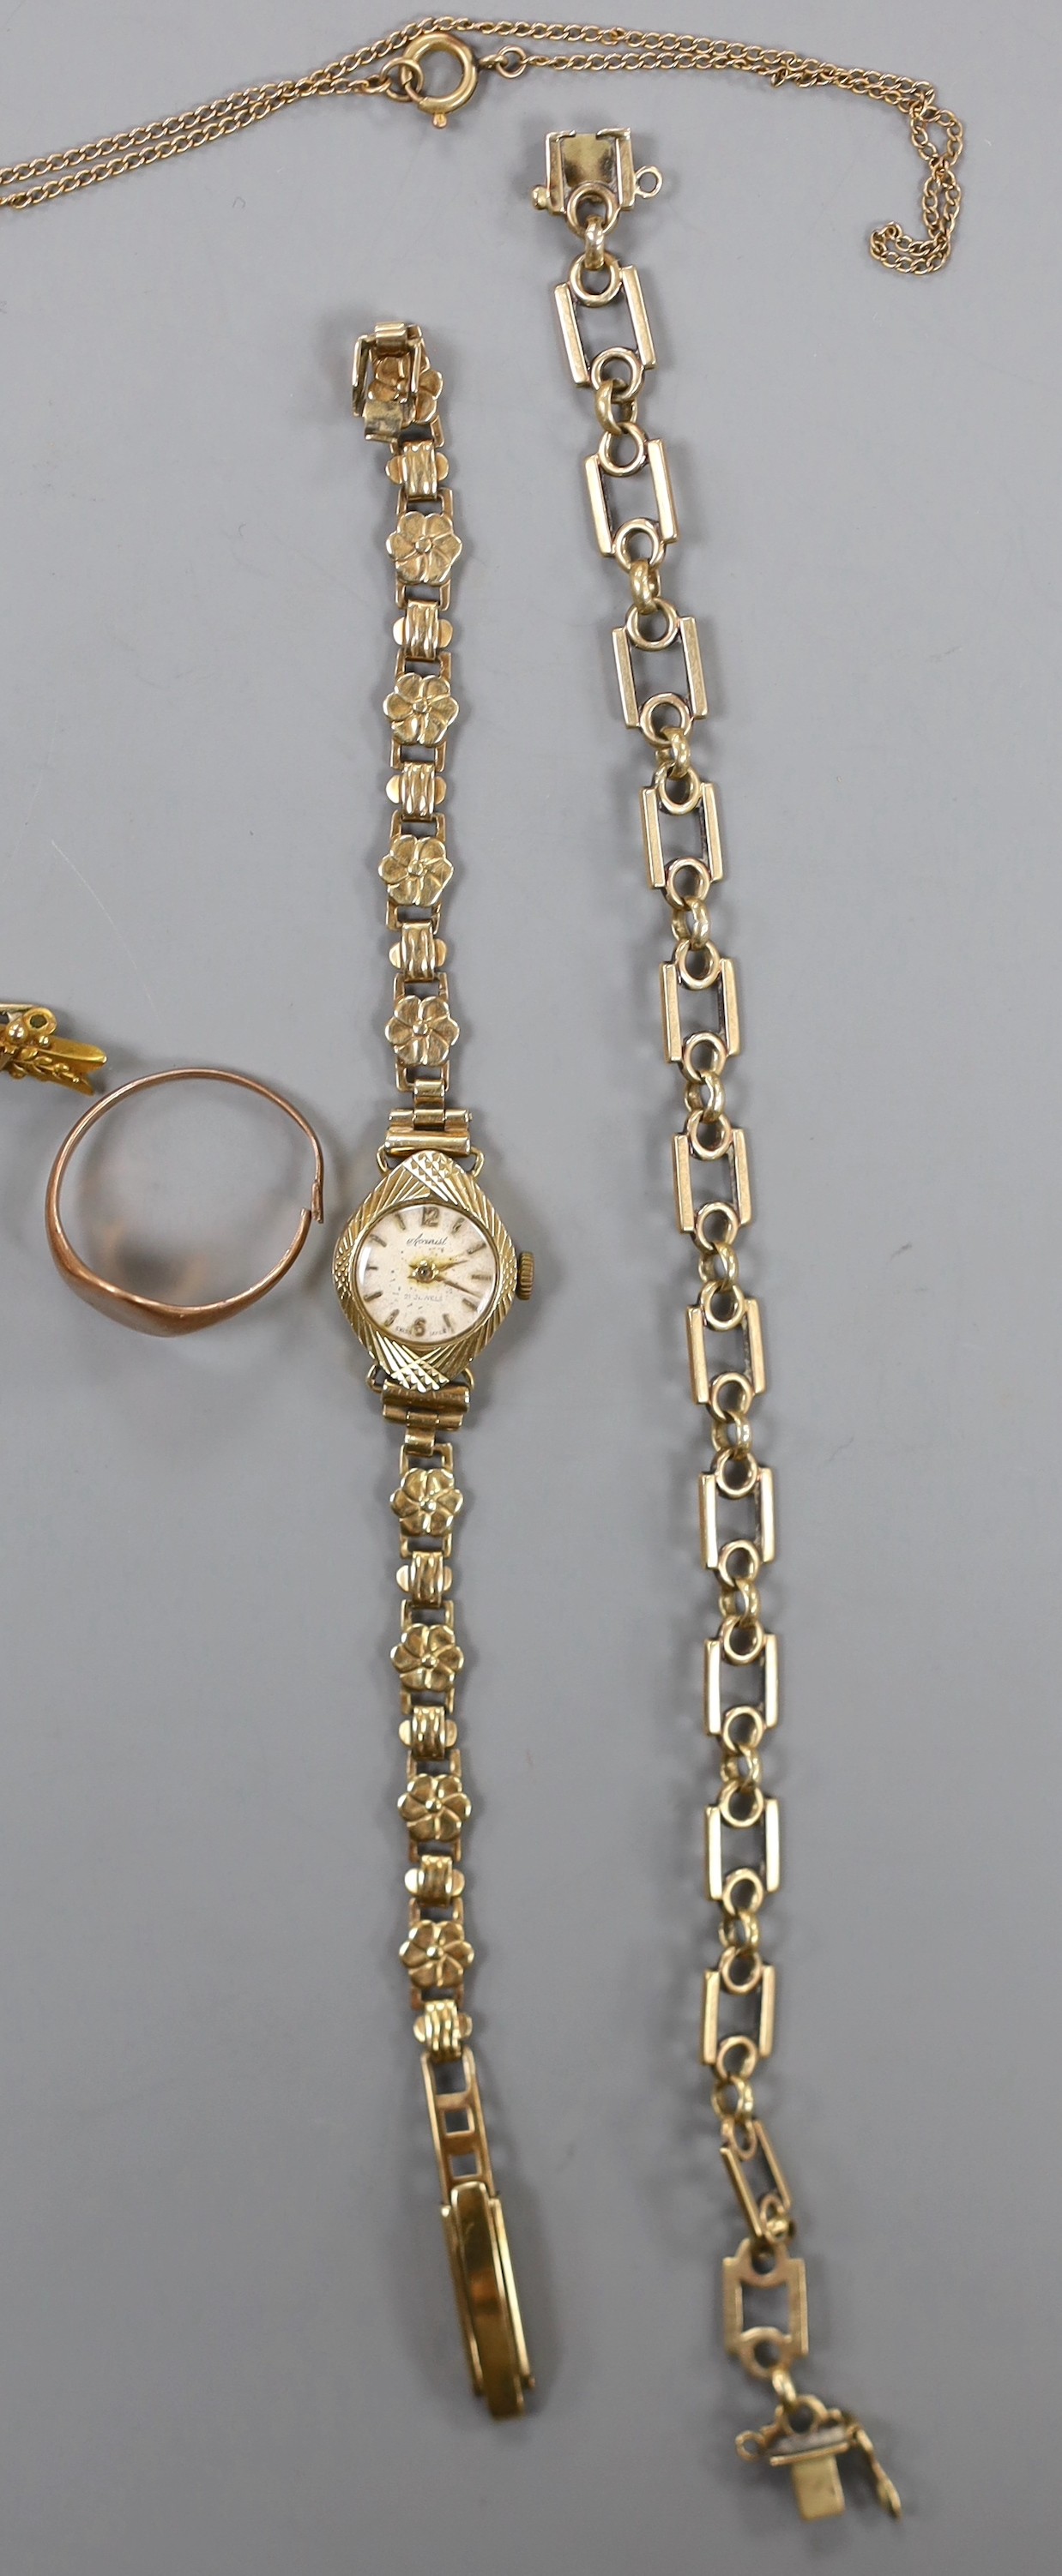 A lady's 9ct gold Accurist manual wind wrist watch, on a 9ct gold bracelet, gross weight 11.2 grams, one other lady's yellow metal wrist watch, three 9ct gold rings, a 9ct gold bracelet, a 9ct cross pendant on 9ct chain,